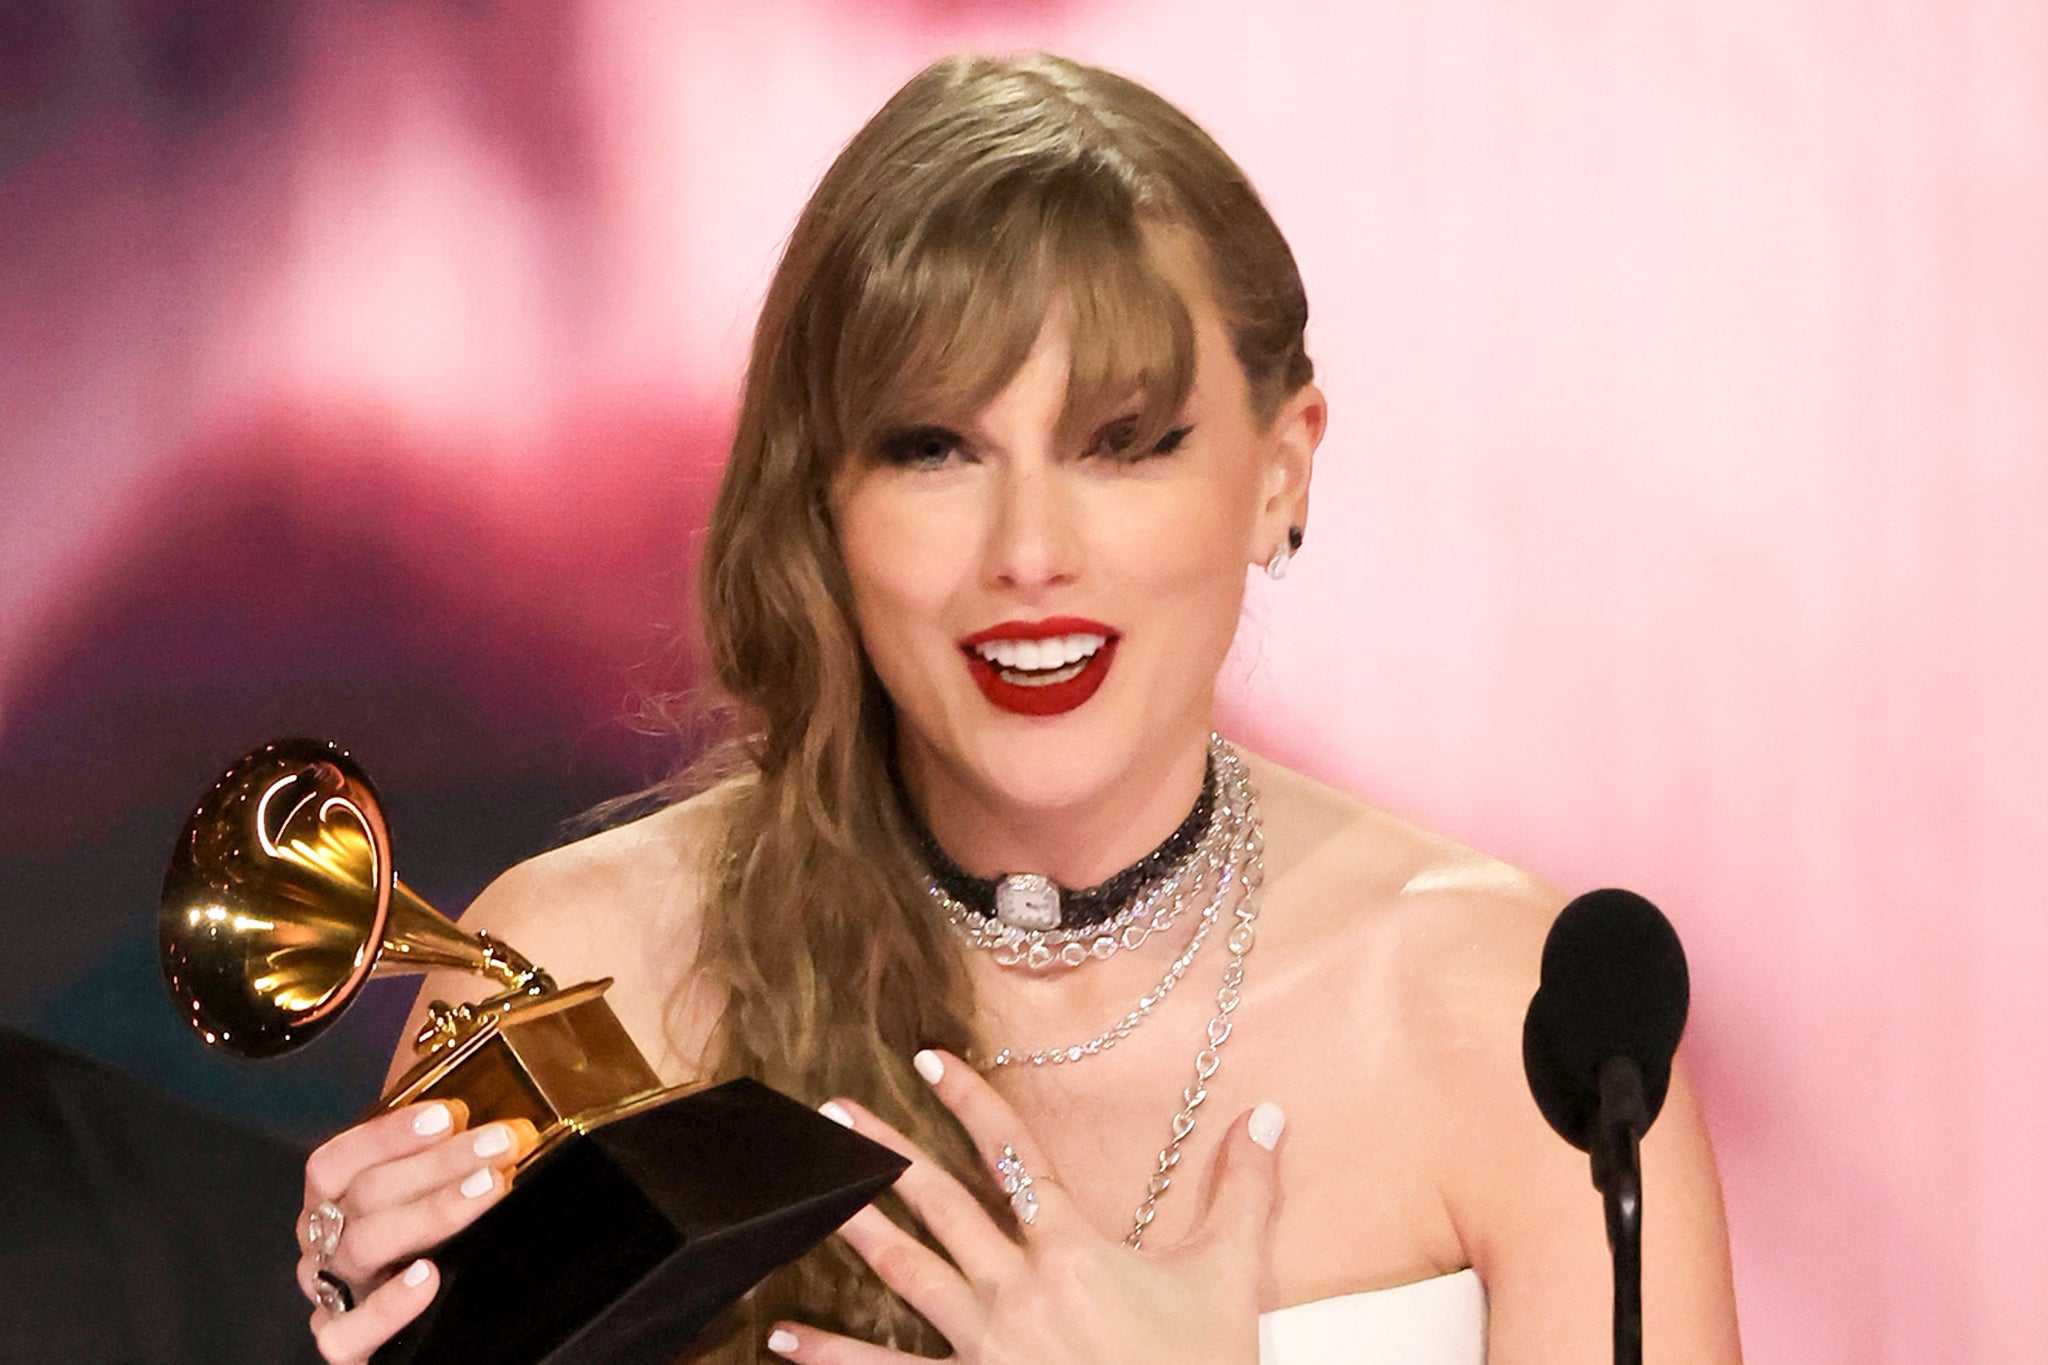 Record breaking: Swift is the only person to have won four Album of the Year Grammys